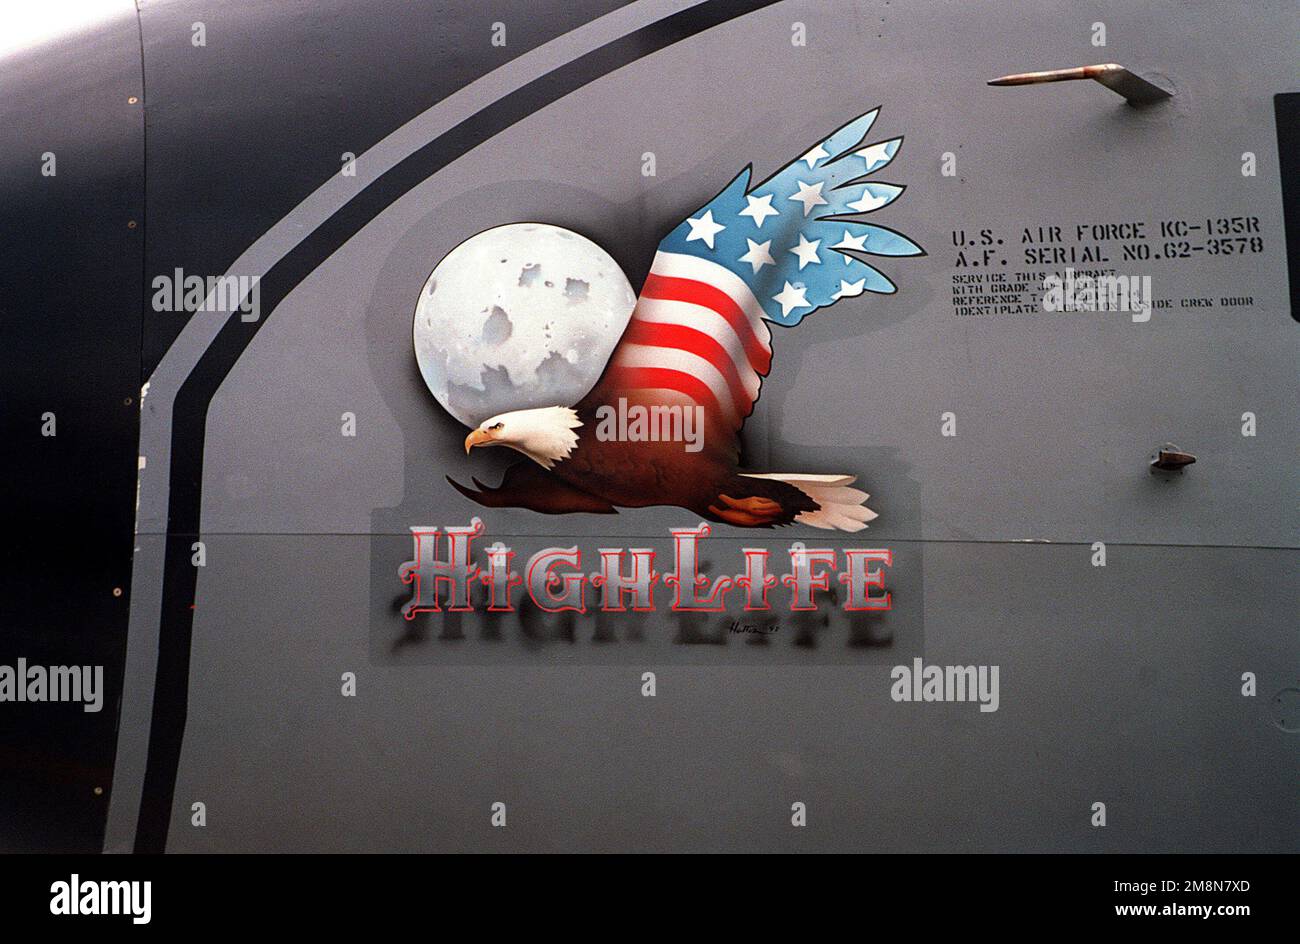 Suffolk County, England. 'High Life' nose art on a KC-135R Stratotanker aircraft, serial number 62-3578, assigned to the 100th Air Refueling Wing, Royal Air Force (RAF) Mildenhall. The artist is STAFF Sergeant Charles Hatton, assigned to the 100th Aircraft Generation Squadron. Base: Raf Mildenhall Country: Great Britain / England (GBR) Stock Photo